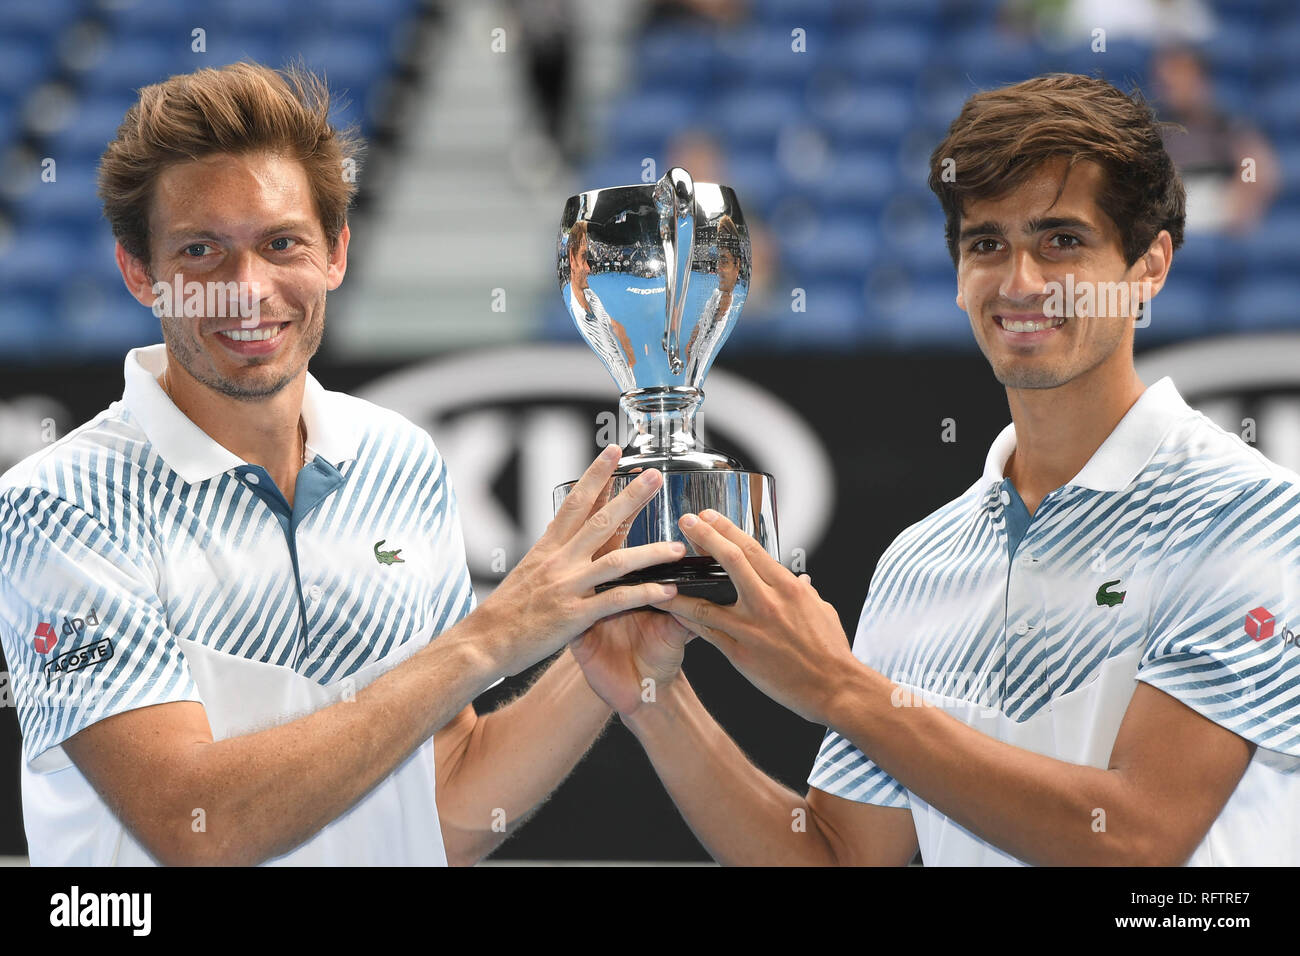 Melbourne, Australia. 27th Jan, Herbert(R)/Nicolas Mahut poses with the trophy during the trophy ceremony for the men's doubles final match between Pierre-Hugues Herbert/Nicolas Mahut of France and Kontinen(Finland)/John ...